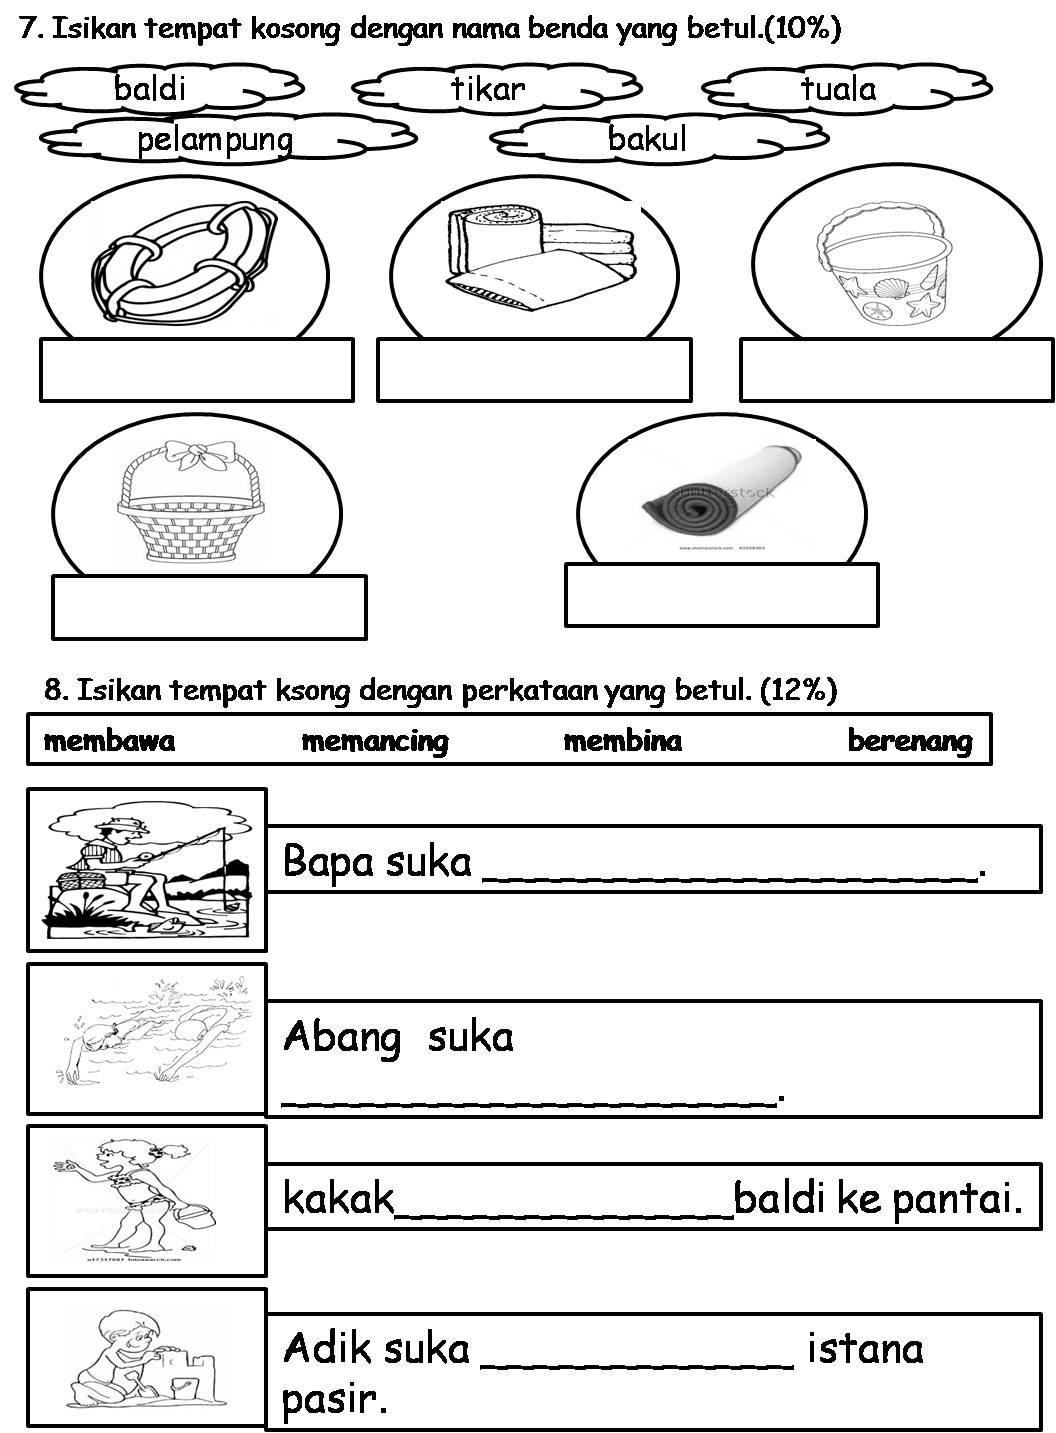 welcome-to-teacher-gesscy-site-preschool-5-and-6-years-old-sample-question-exam-bahasa-malaysia